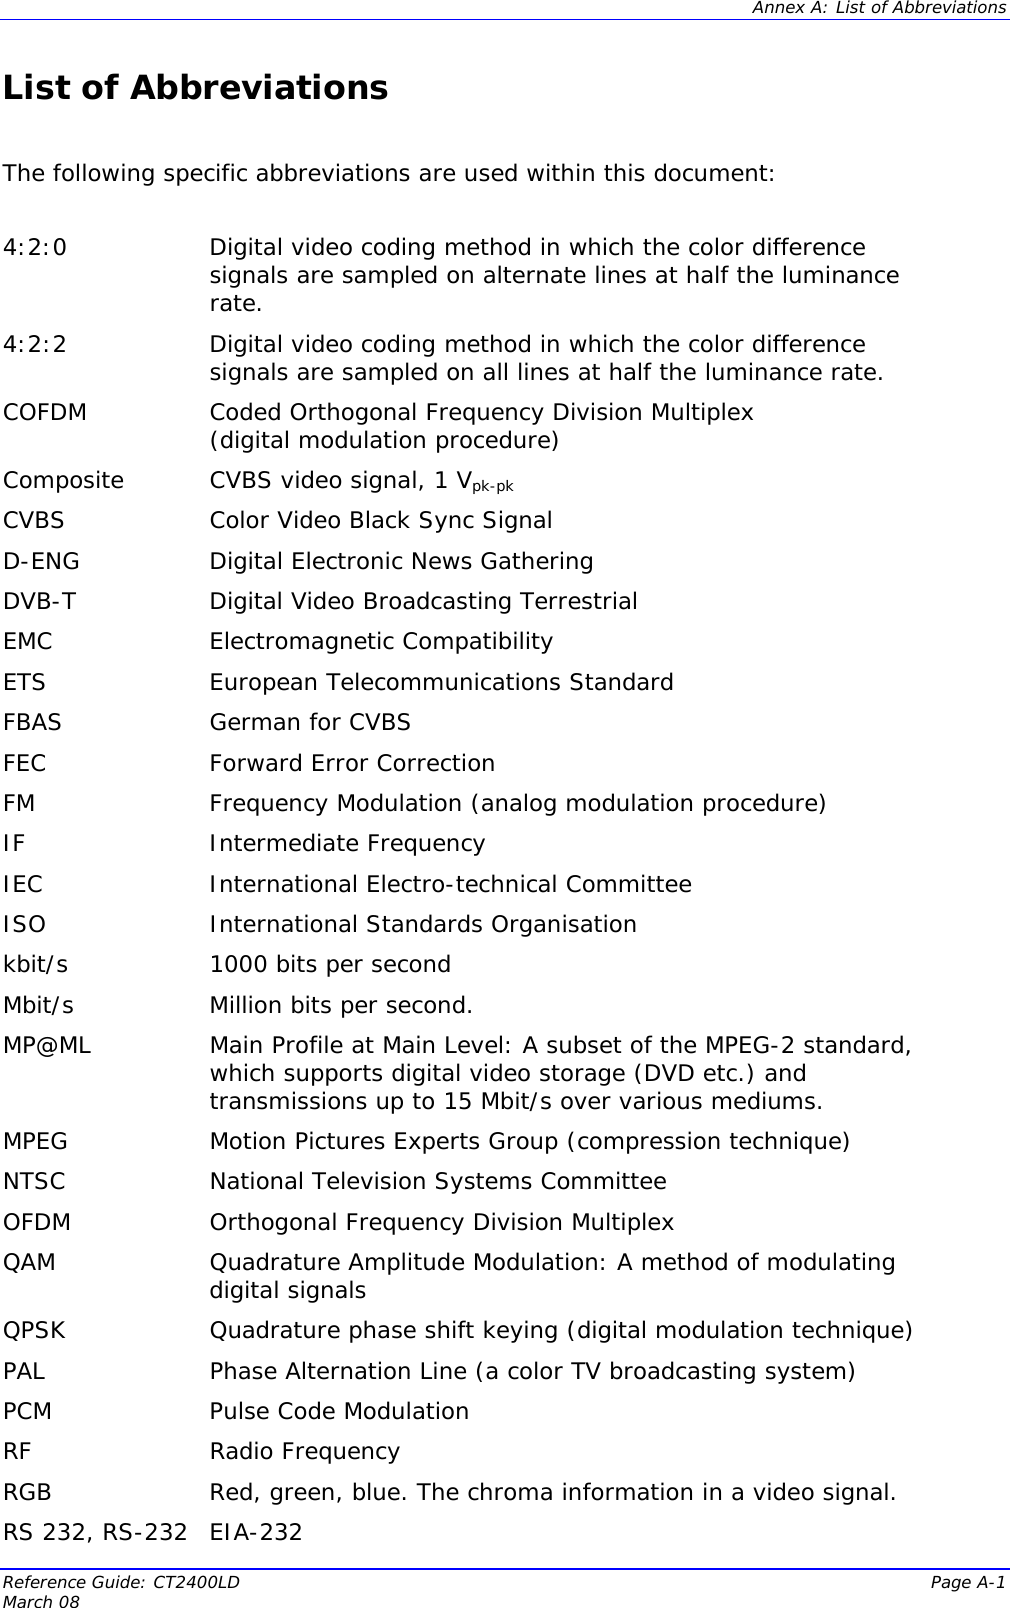  Annex A: List of Abbreviations Reference Guide: CT2400LD  Page A-1 March 08   List of Abbreviations  The following specific abbreviations are used within this document:   4:2:0  Digital video coding method in which the color difference signals are sampled on alternate lines at half the luminance rate. 4:2:2  Digital video coding method in which the color difference signals are sampled on all lines at half the luminance rate. COFDM  Coded Orthogonal Frequency Division Multiplex  (digital modulation procedure) Composite  CVBS video signal, 1 Vpk-pk CVBS  Color Video Black Sync Signal D-ENG  Digital Electronic News Gathering DVB-T  Digital Video Broadcasting Terrestrial EMC   Electromagnetic Compatibility ETS  European Telecommunications Standard FBAS German for CVBS FEC  Forward Error Correction FM Frequency Modulation (analog modulation procedure) IF Intermediate Frequency IEC International Electro-technical Committee ISO International Standards Organisation kbit/s   1000 bits per second Mbit/s  Million bits per second. MP@ML  Main Profile at Main Level: A subset of the MPEG-2 standard, which supports digital video storage (DVD etc.) and transmissions up to 15 Mbit/s over various mediums. MPEG  Motion Pictures Experts Group (compression technique)  NTSC  National Television Systems Committee OFDM   Orthogonal Frequency Division Multiplex QAM  Quadrature Amplitude Modulation: A method of modulating digital signals QPSK  Quadrature phase shift keying (digital modulation technique) PAL  Phase Alternation Line (a color TV broadcasting system) PCM  Pulse Code Modulation RF Radio Frequency RGB  Red, green, blue. The chroma information in a video signal. RS 232, RS-232 EIA-232 